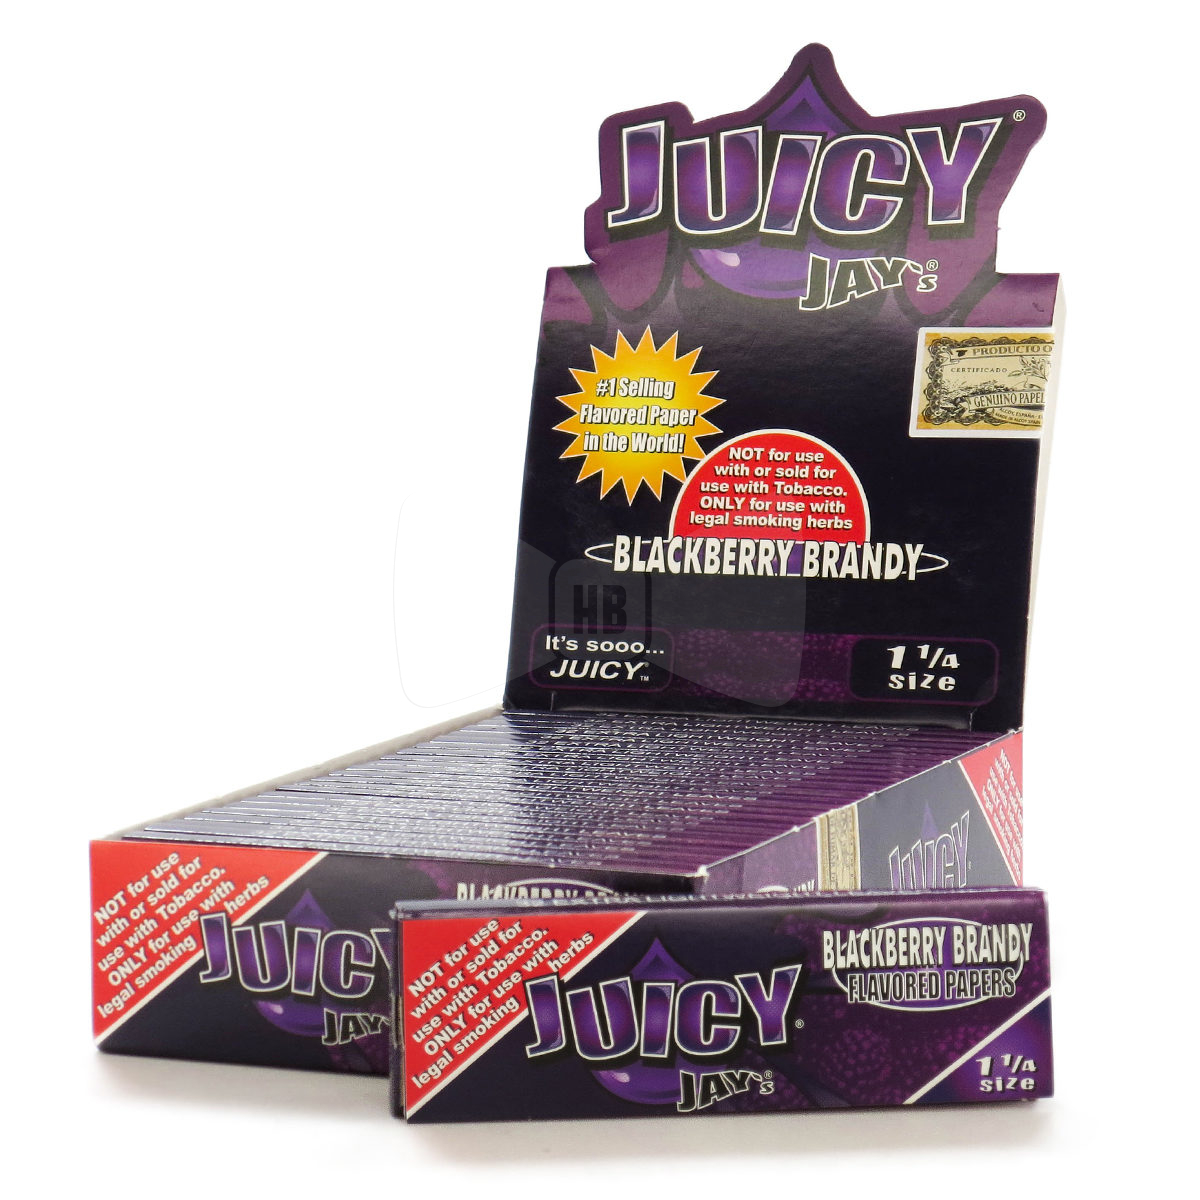 Juicy Jays Blackberry Brandy Rolling Papers 1 Pack King Size